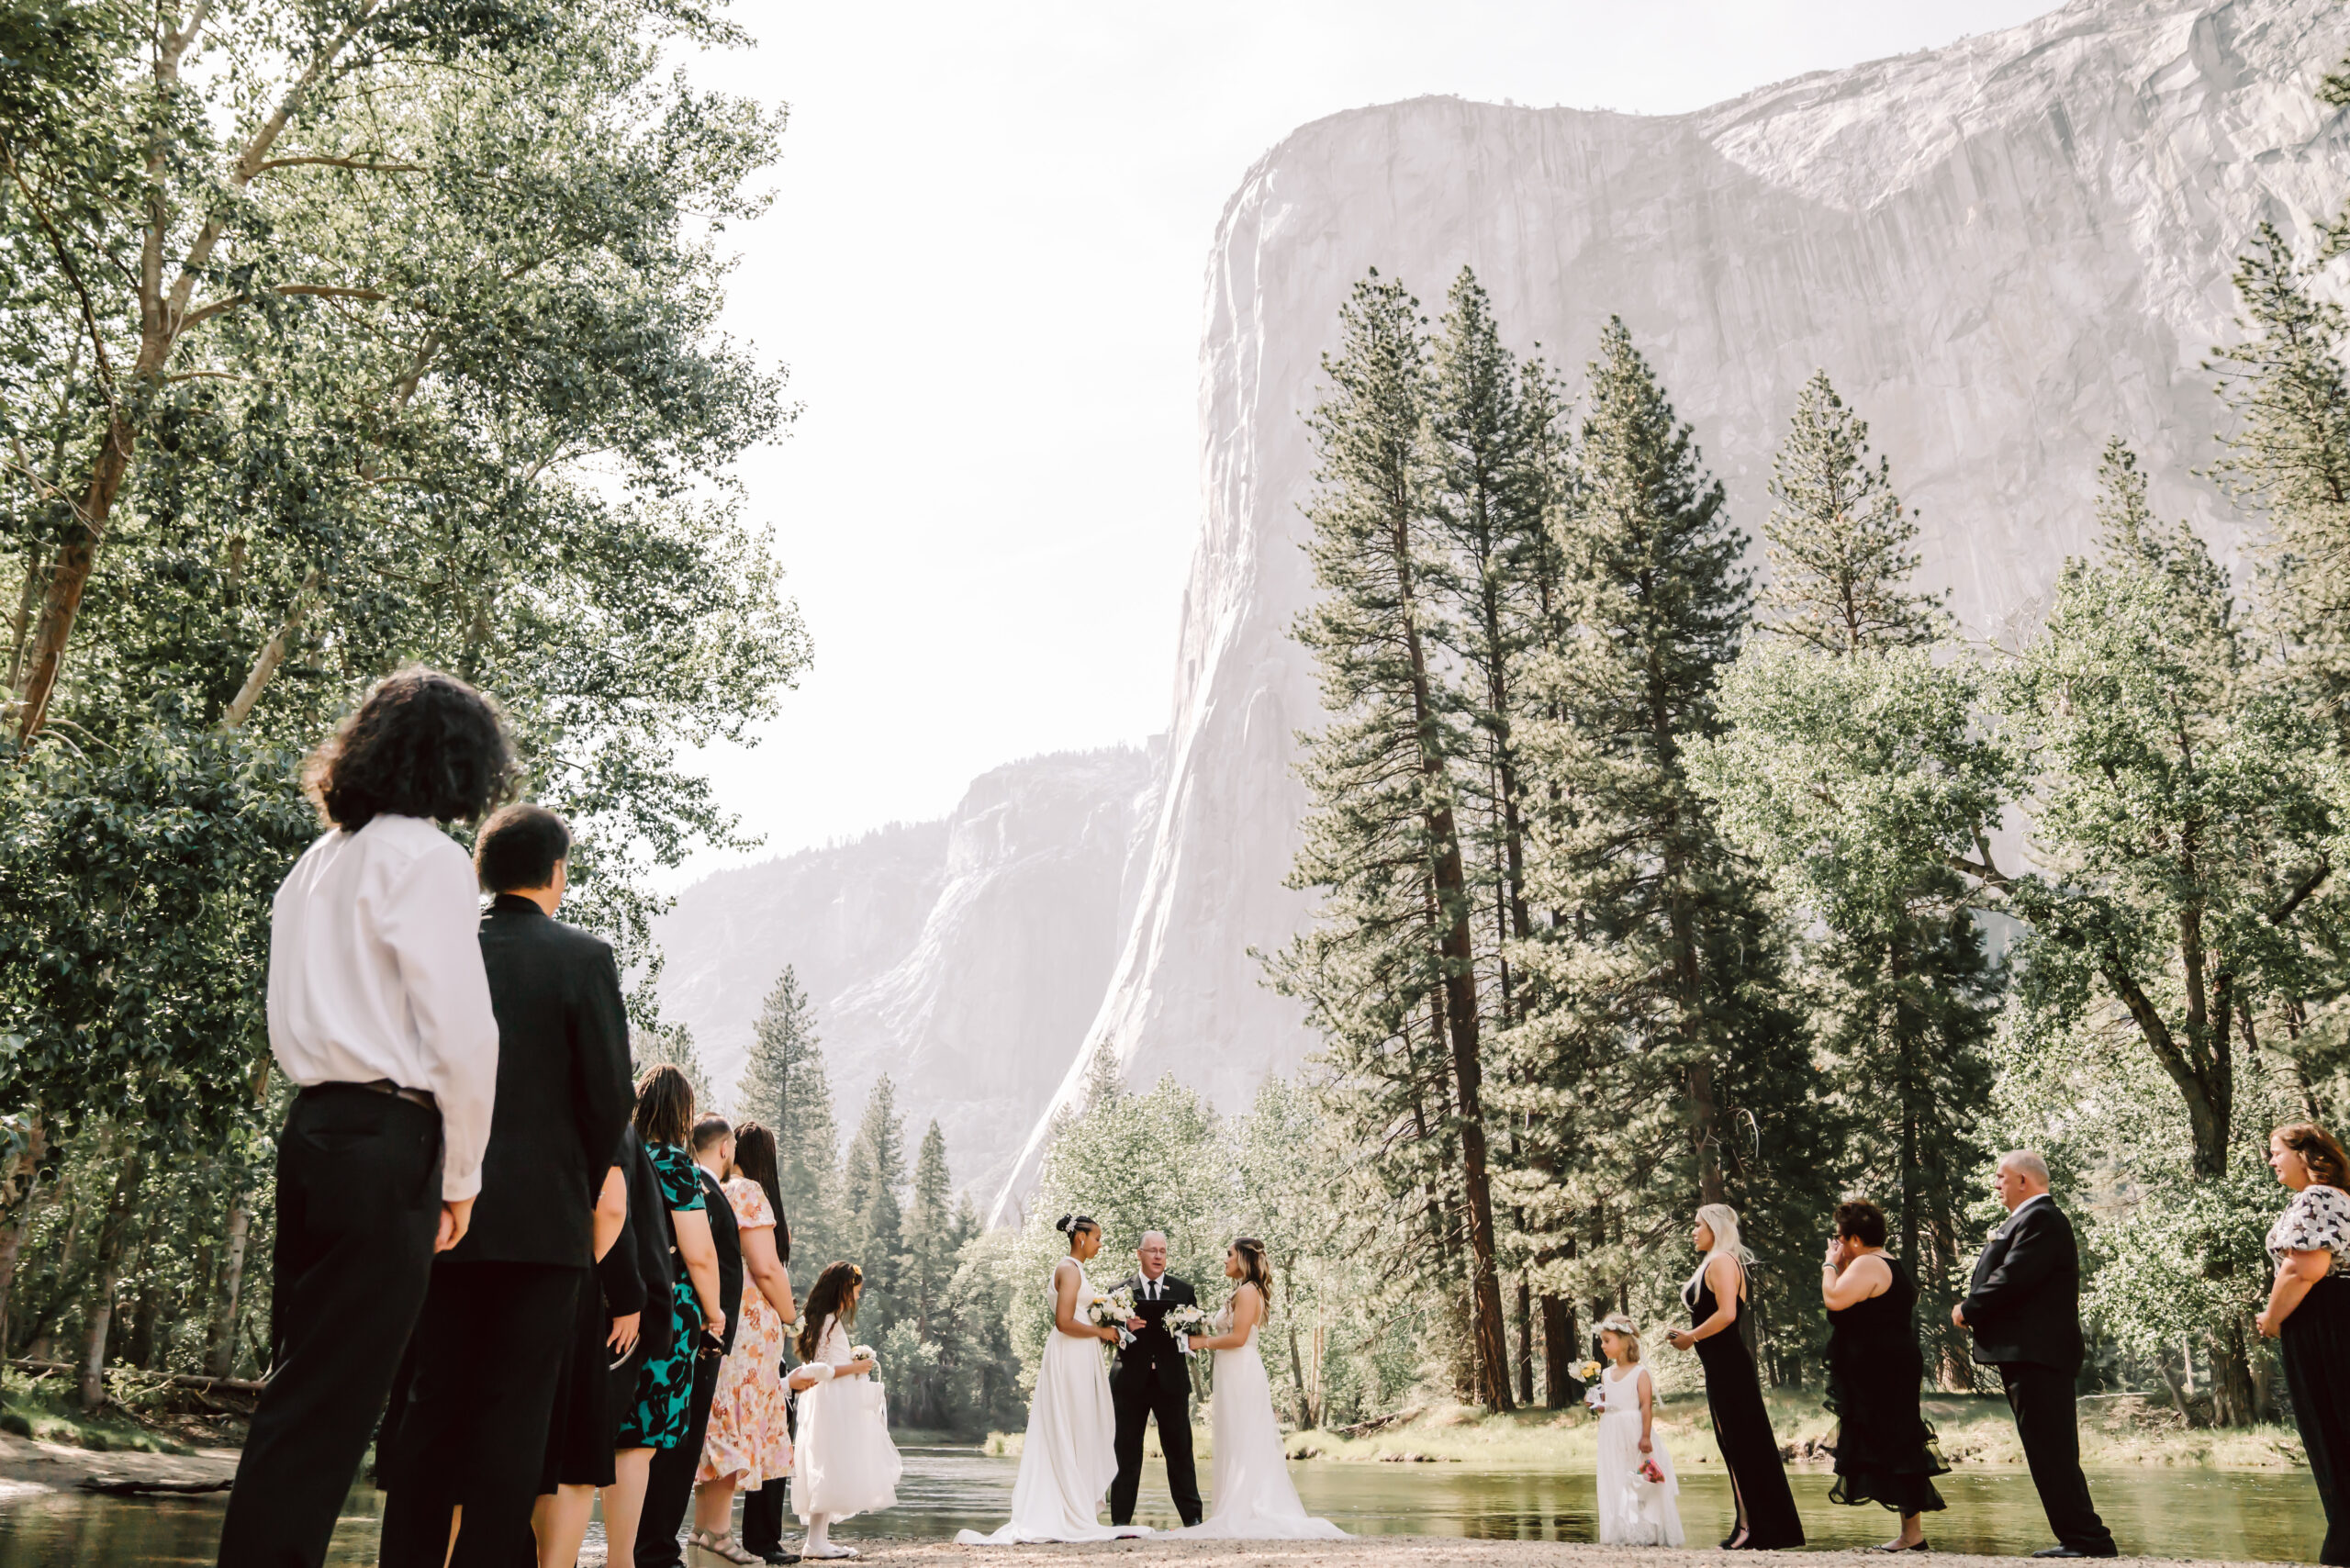 A wedding ceremony at Cathedral Beach in Yosemite